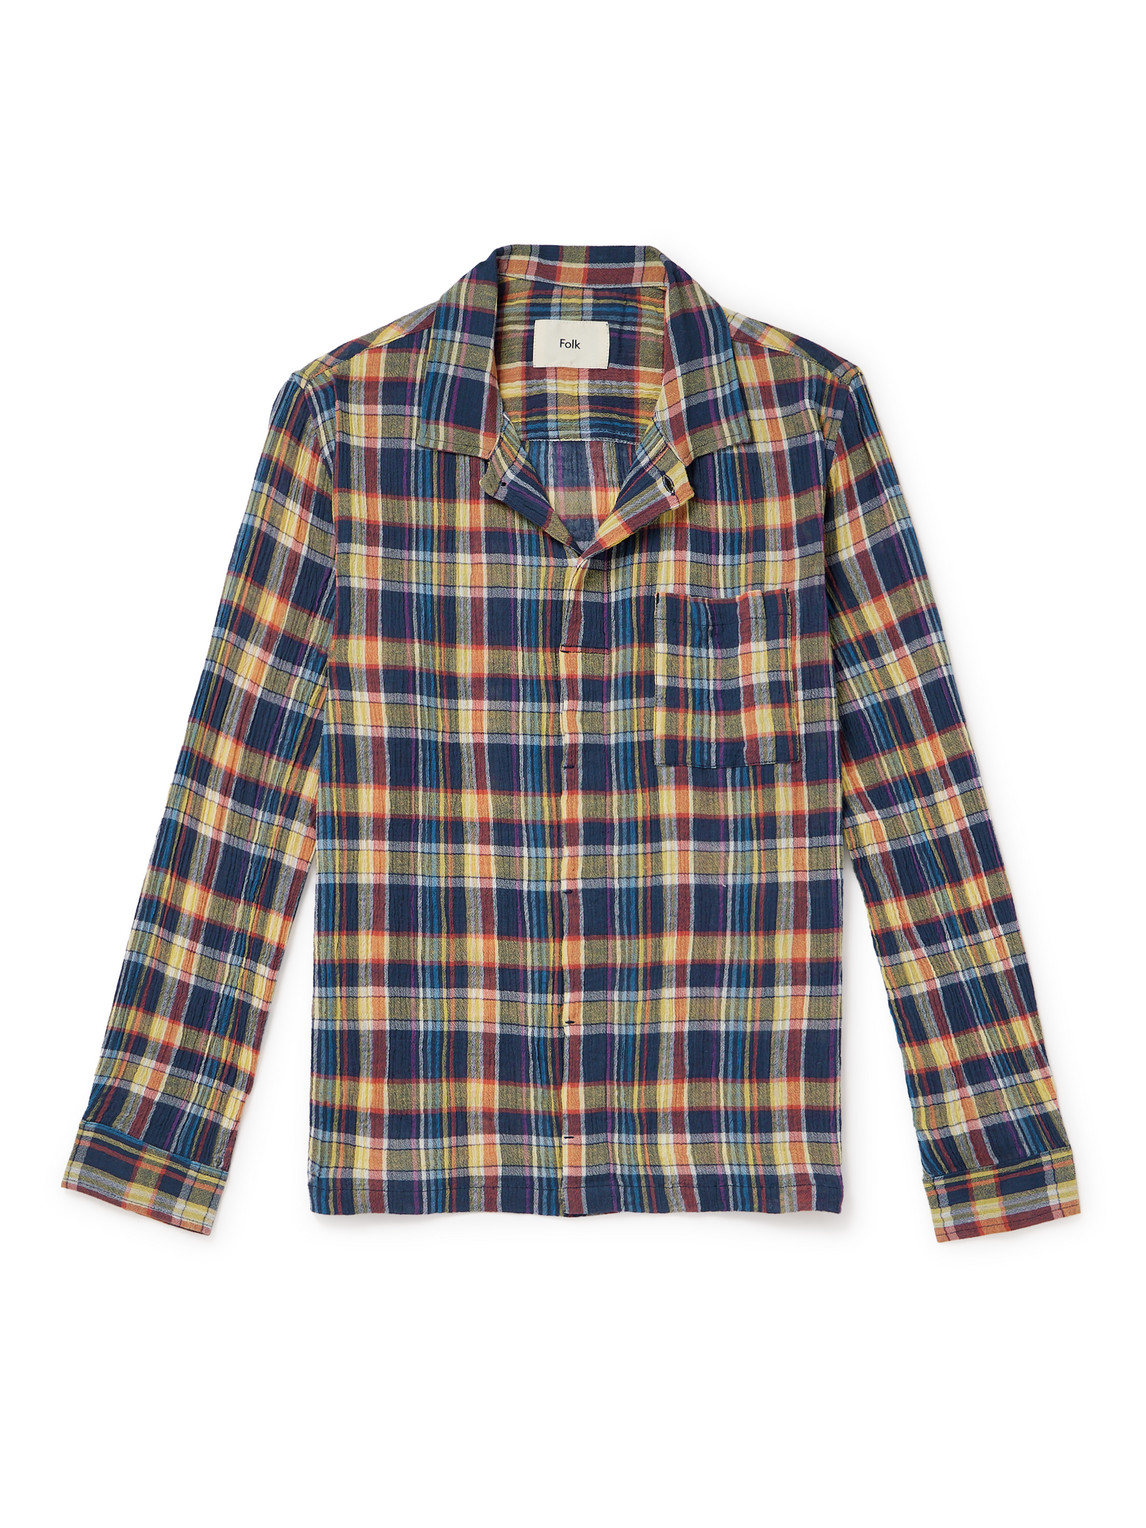 Folk Patch Checked Cotton Shirt In Multi